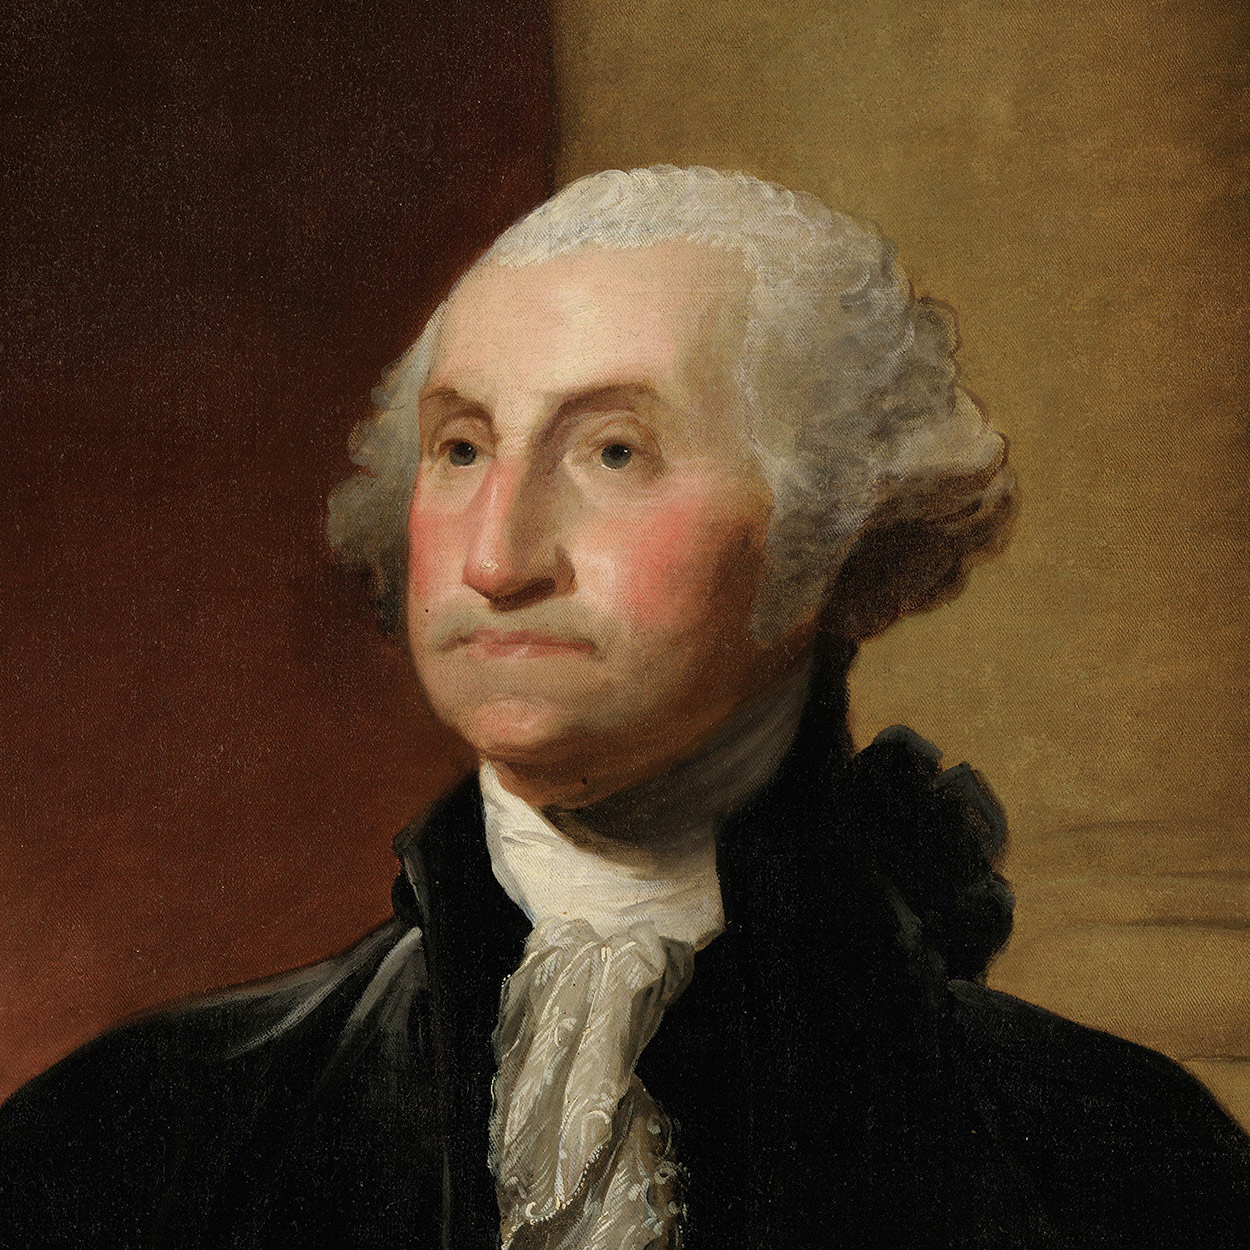 George Washington stepped down at the height of his power